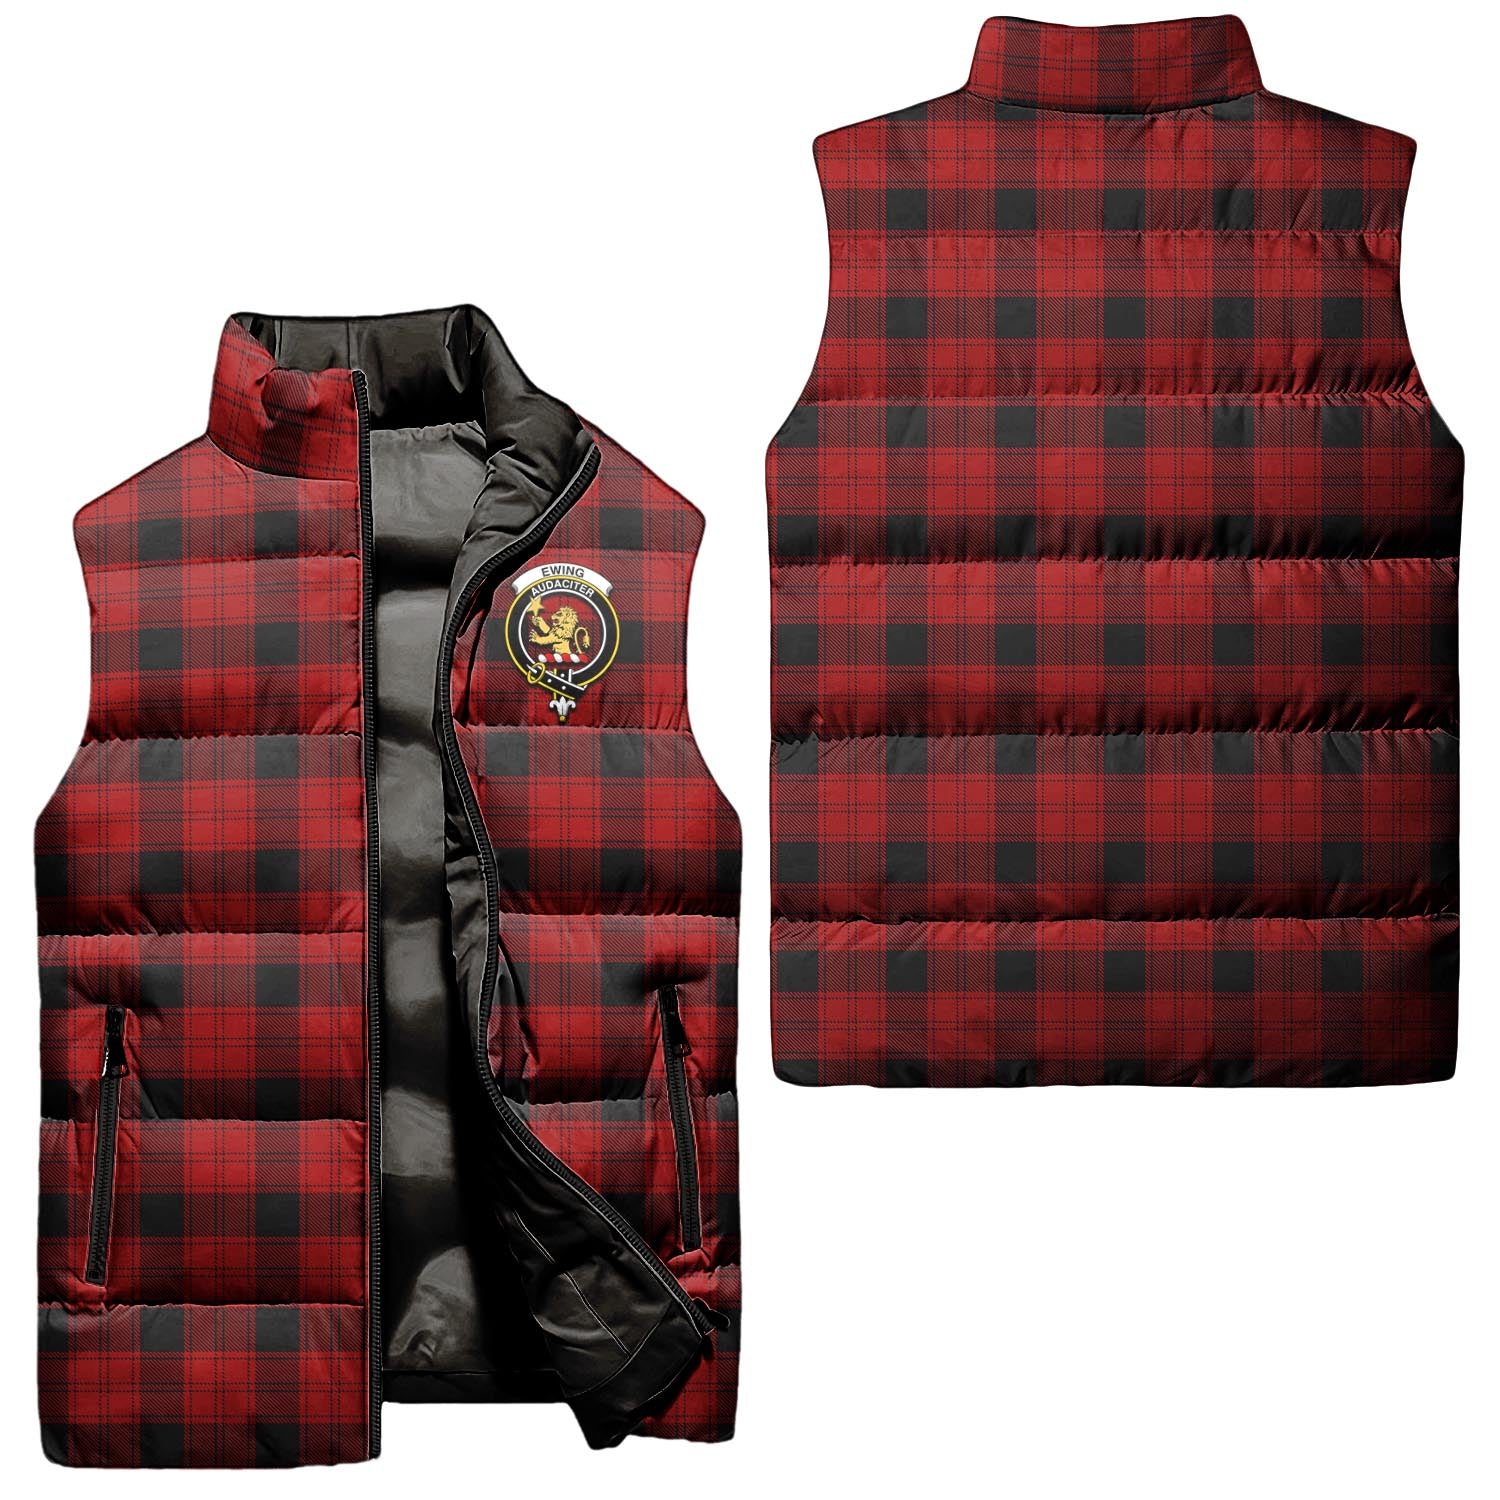 ewing-clan-puffer-vest-family-crest-plaid-sleeveless-down-jacket